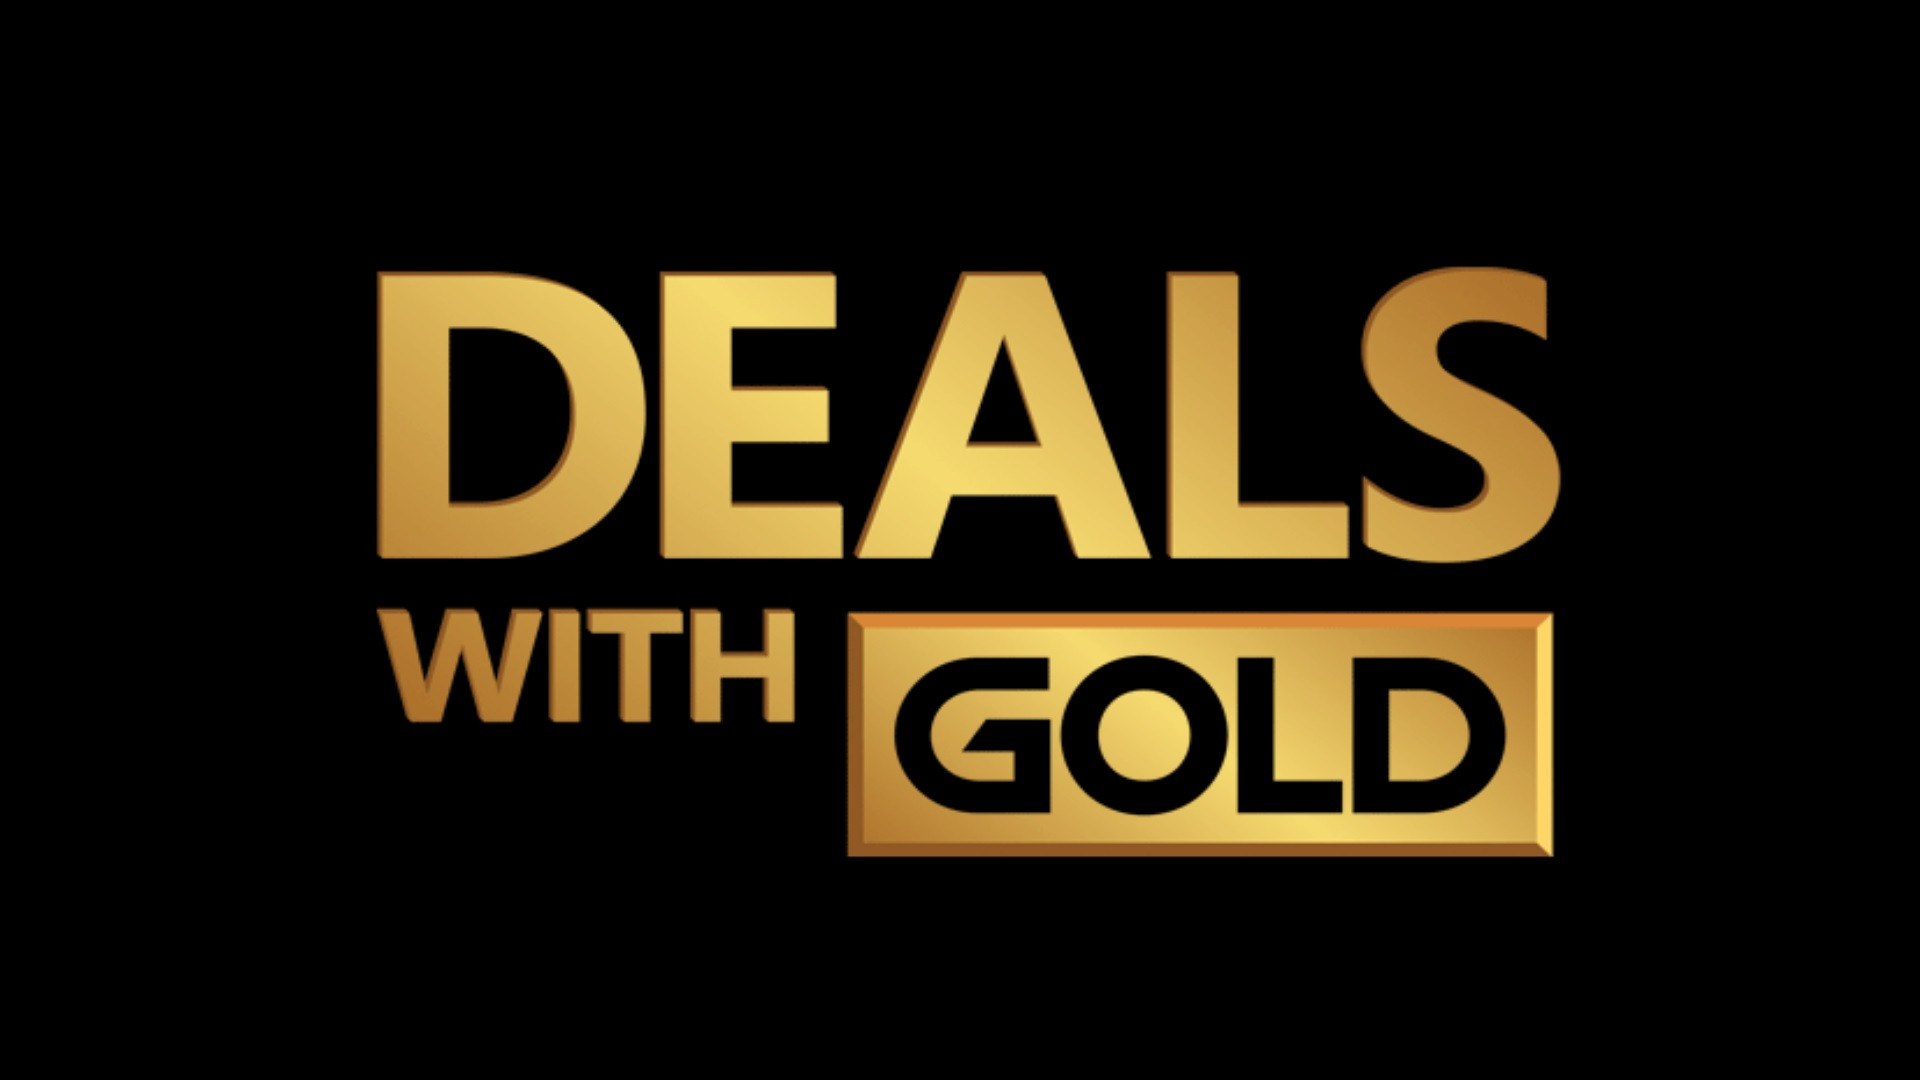 Deals with Gold semaine 43